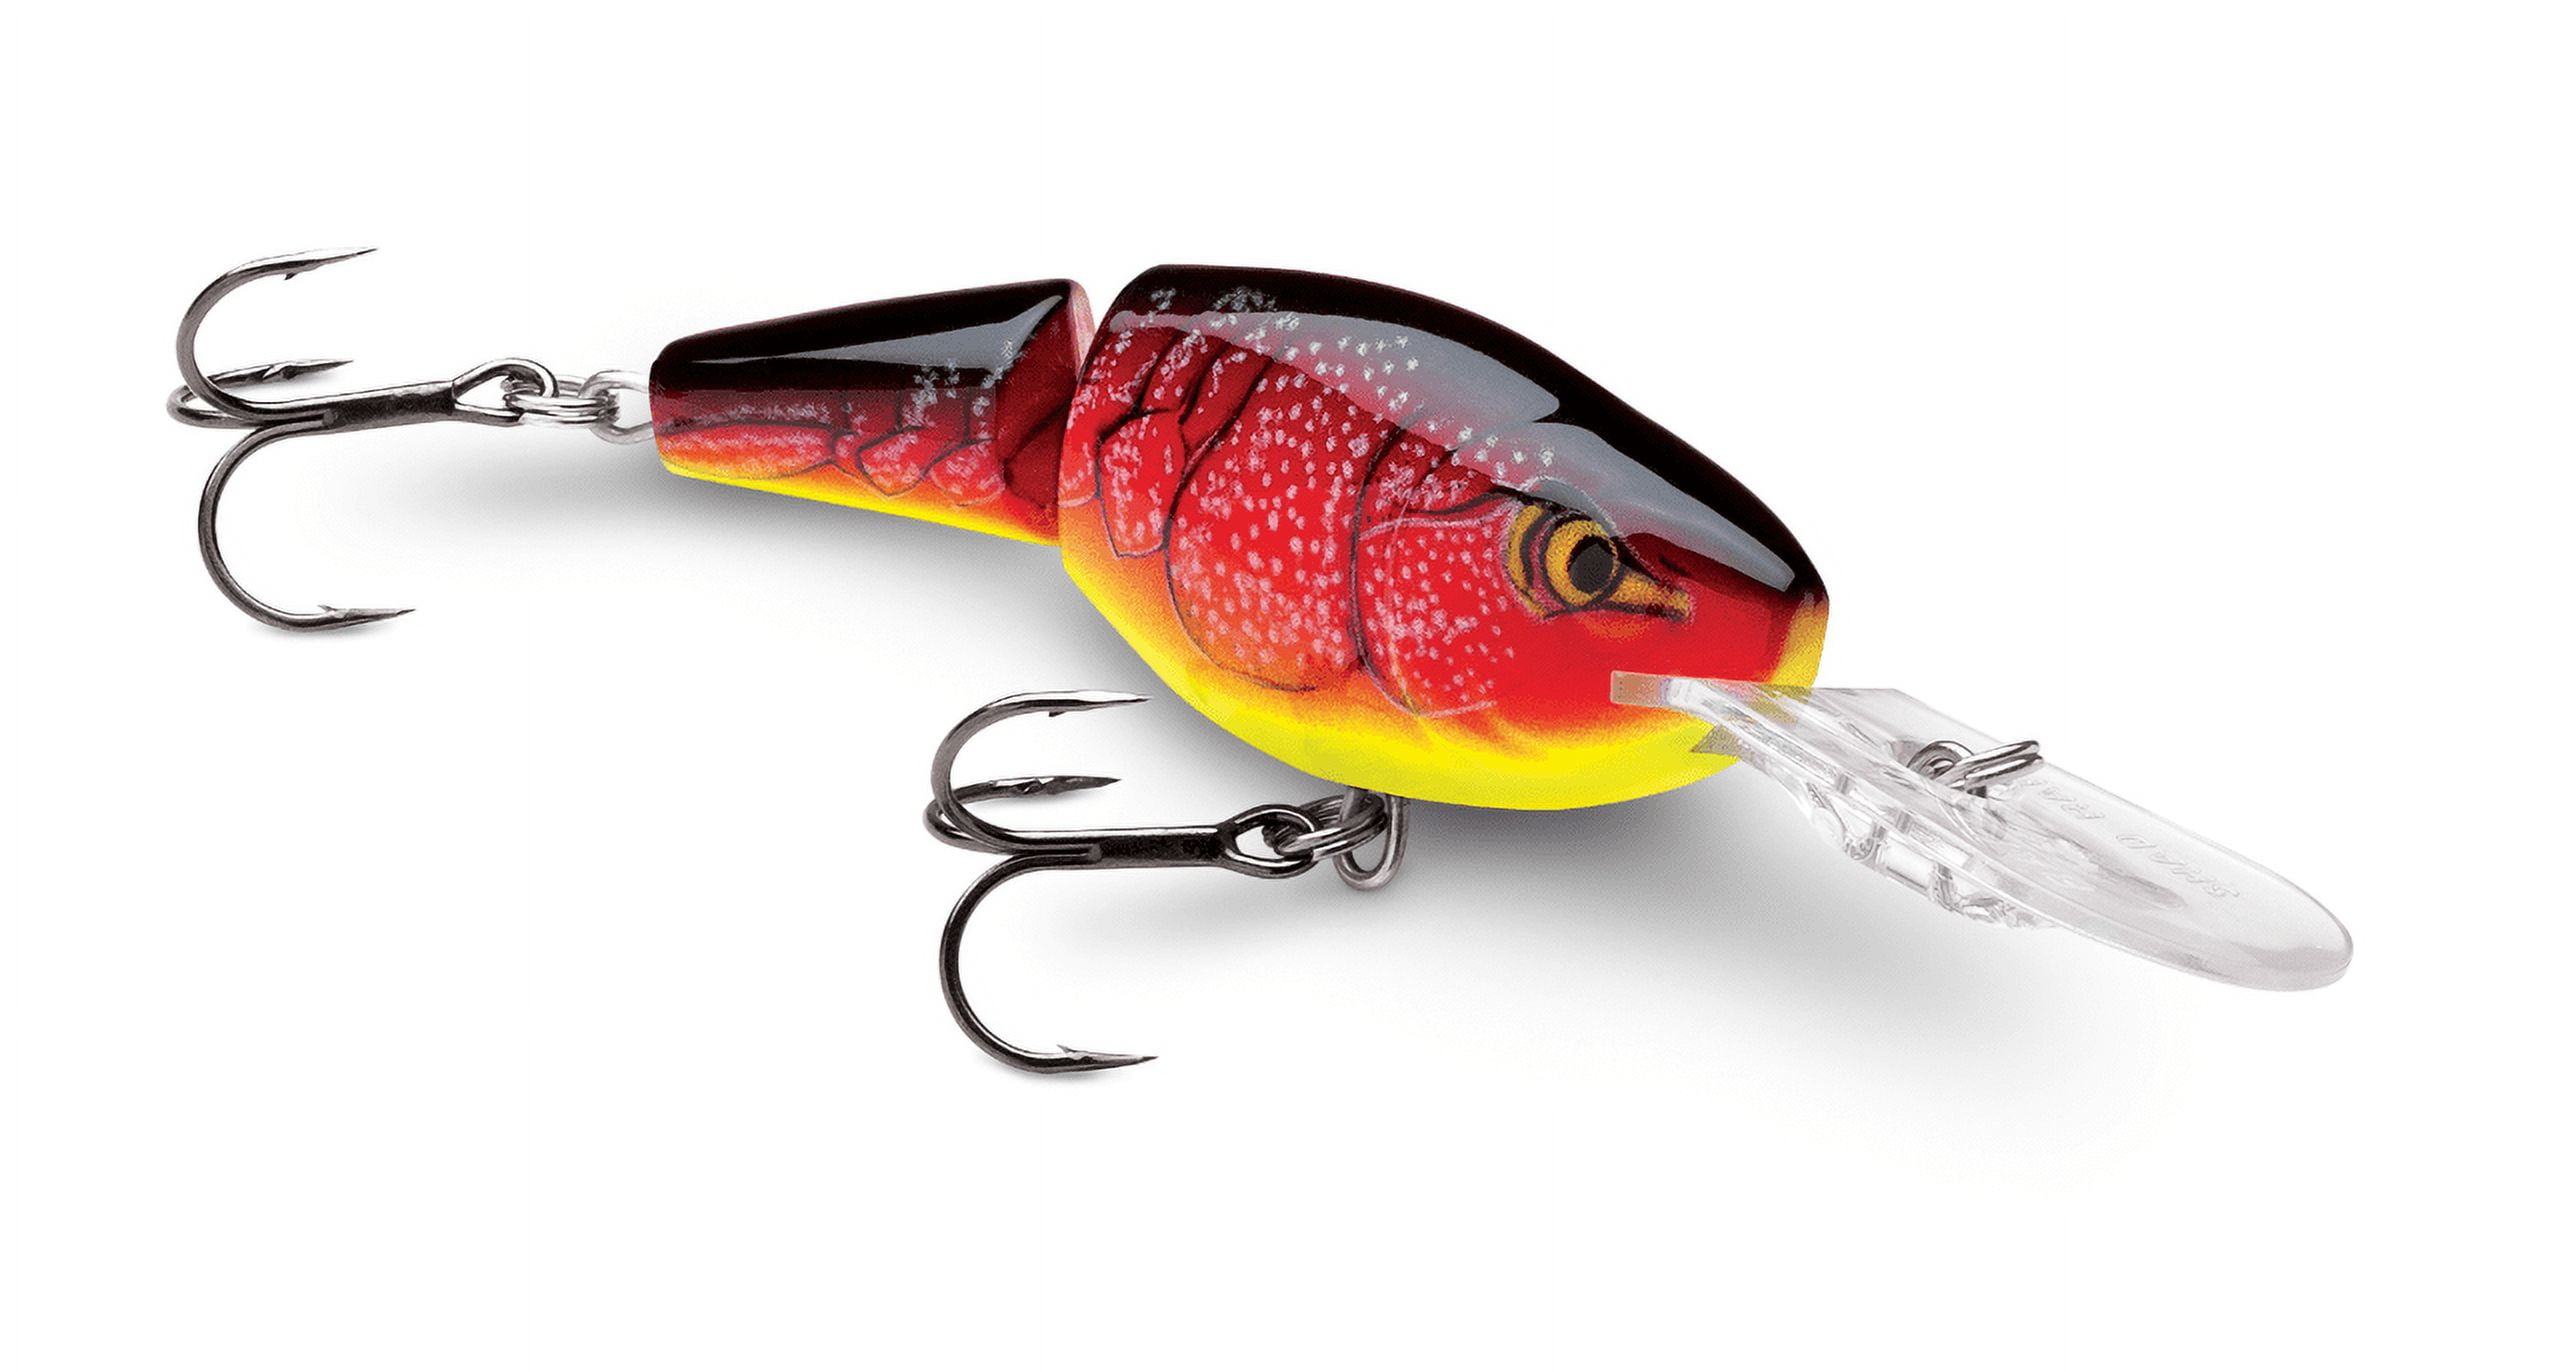 Rapala Jointed Shad Rap 07 Crankbait Fishing Lure 2.75 7/16oz Red